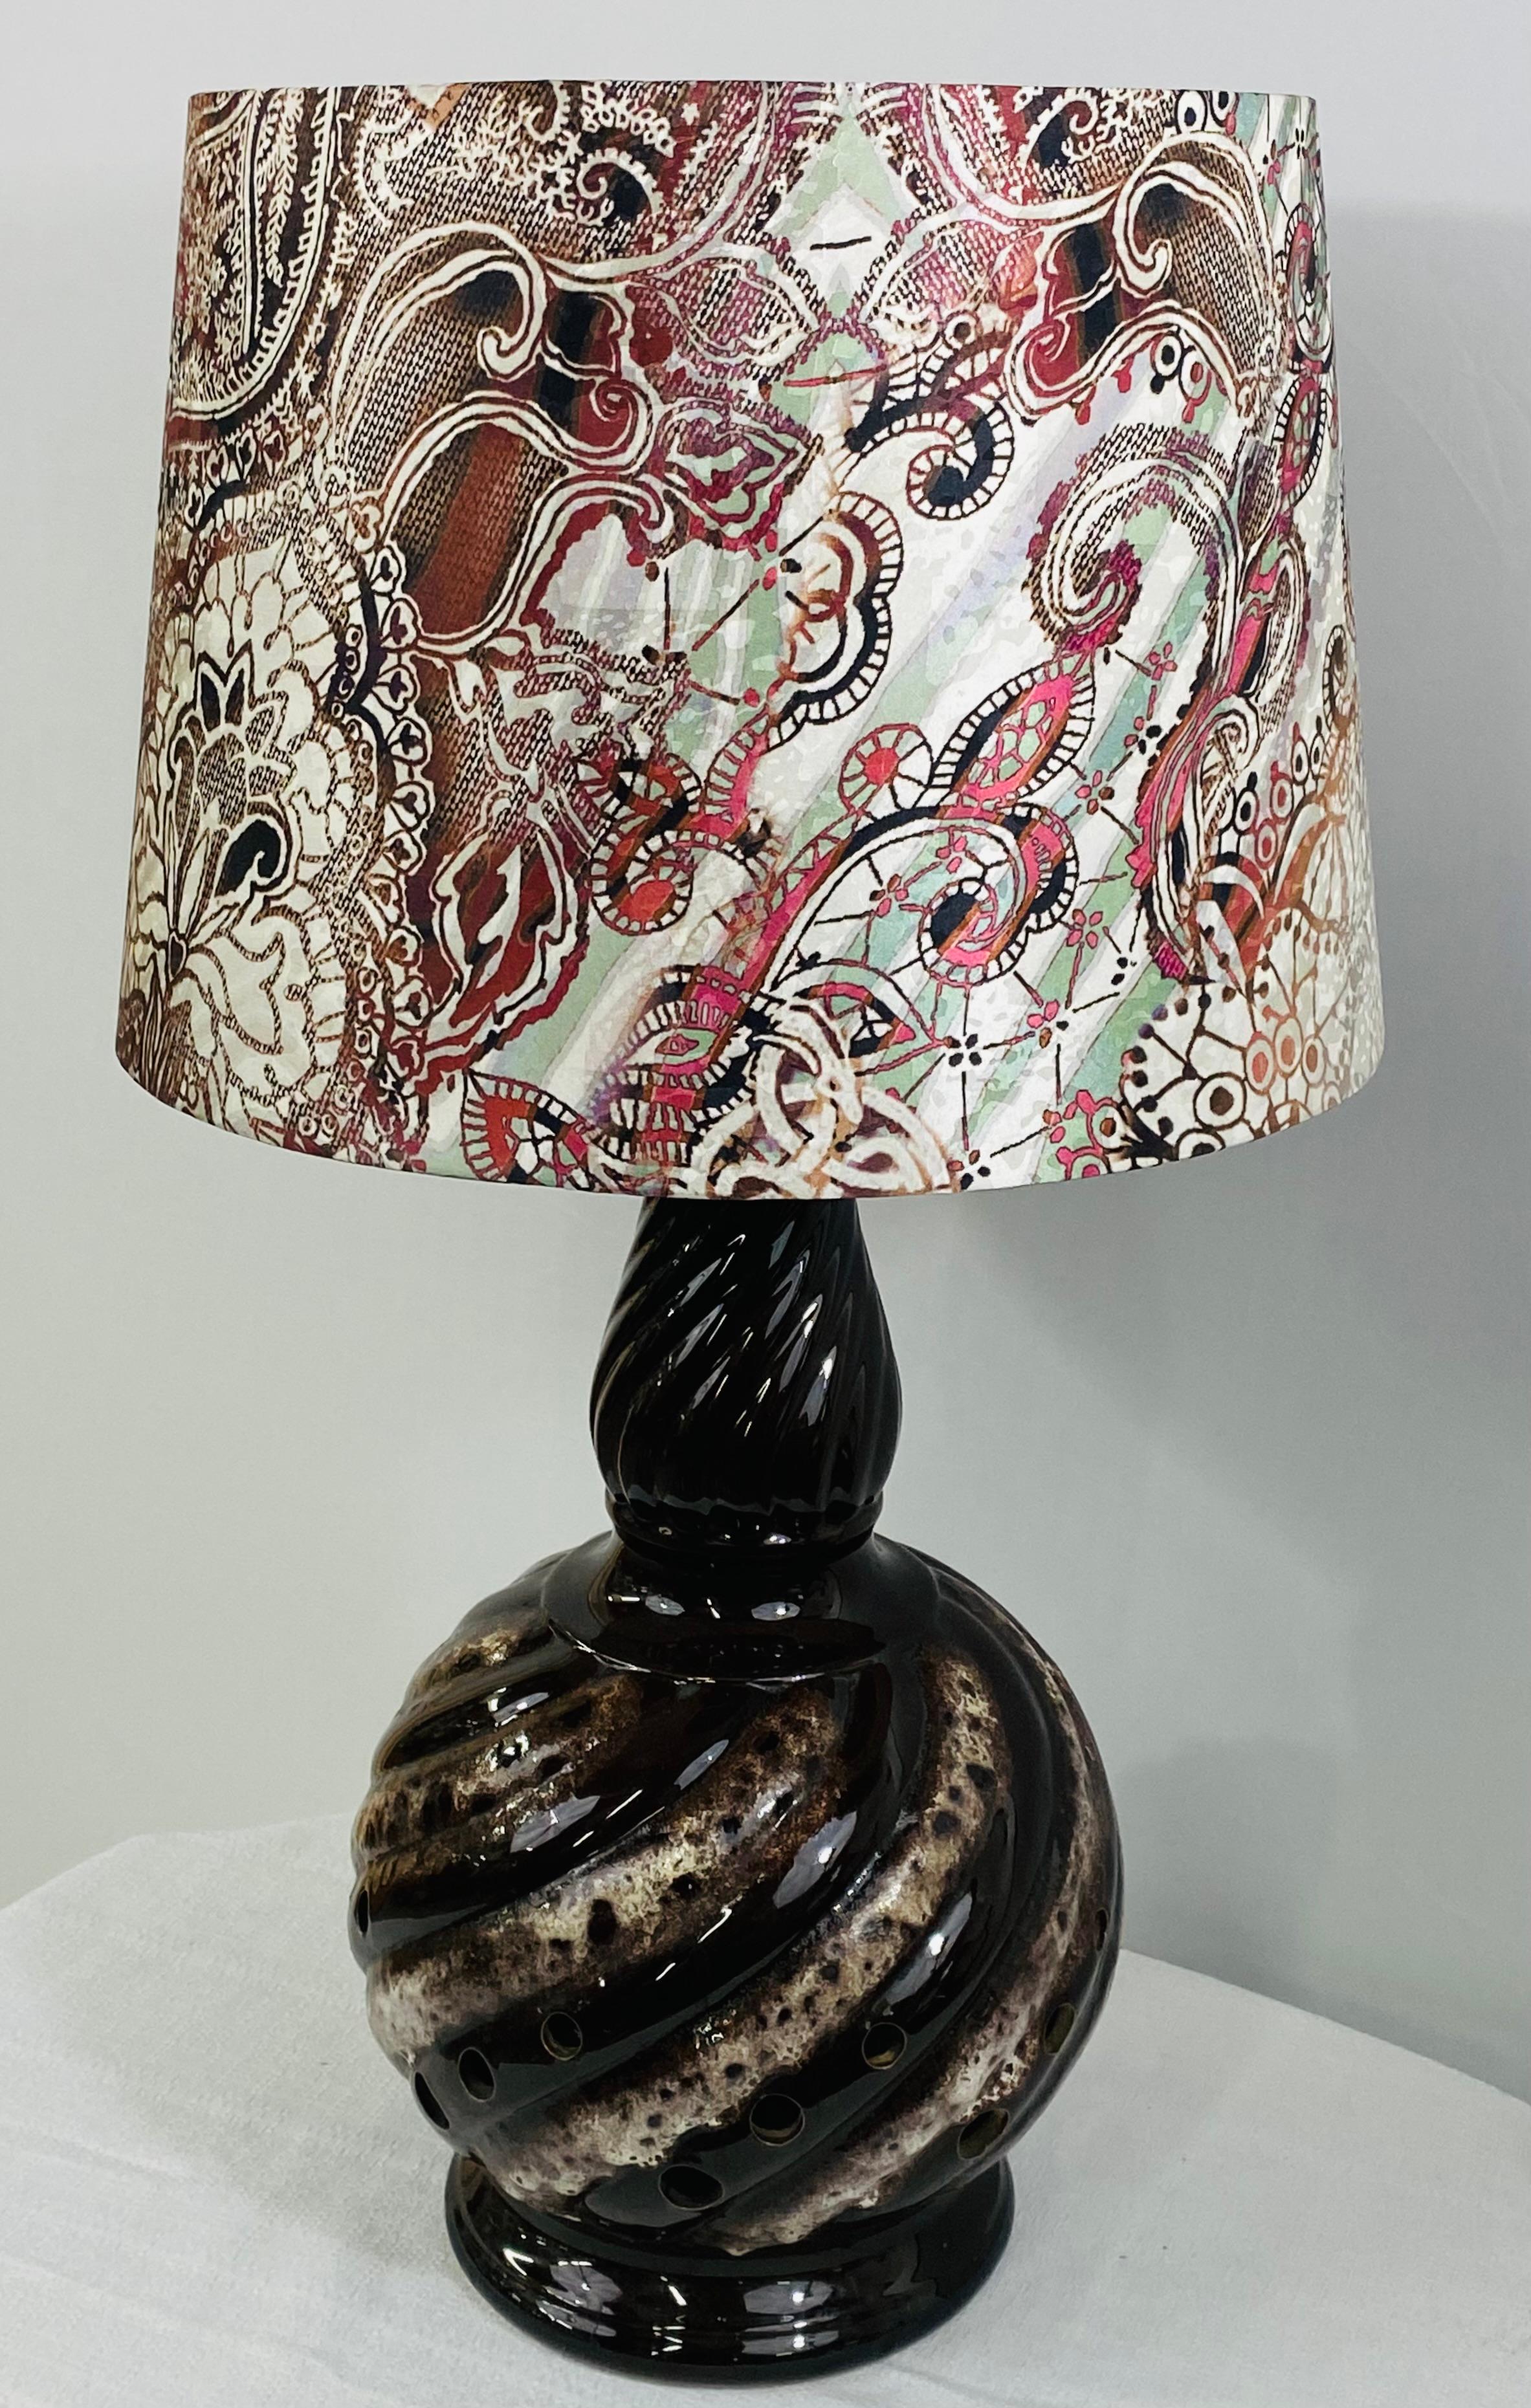 A stylish Boho Chic table lamp. The lamp is a vase or jar converted and has two lights installed , a standard bulbs as the main lighting source and a small light inside the jar. The lamp 's body is made of ceramic featuring wavy design in dark brown